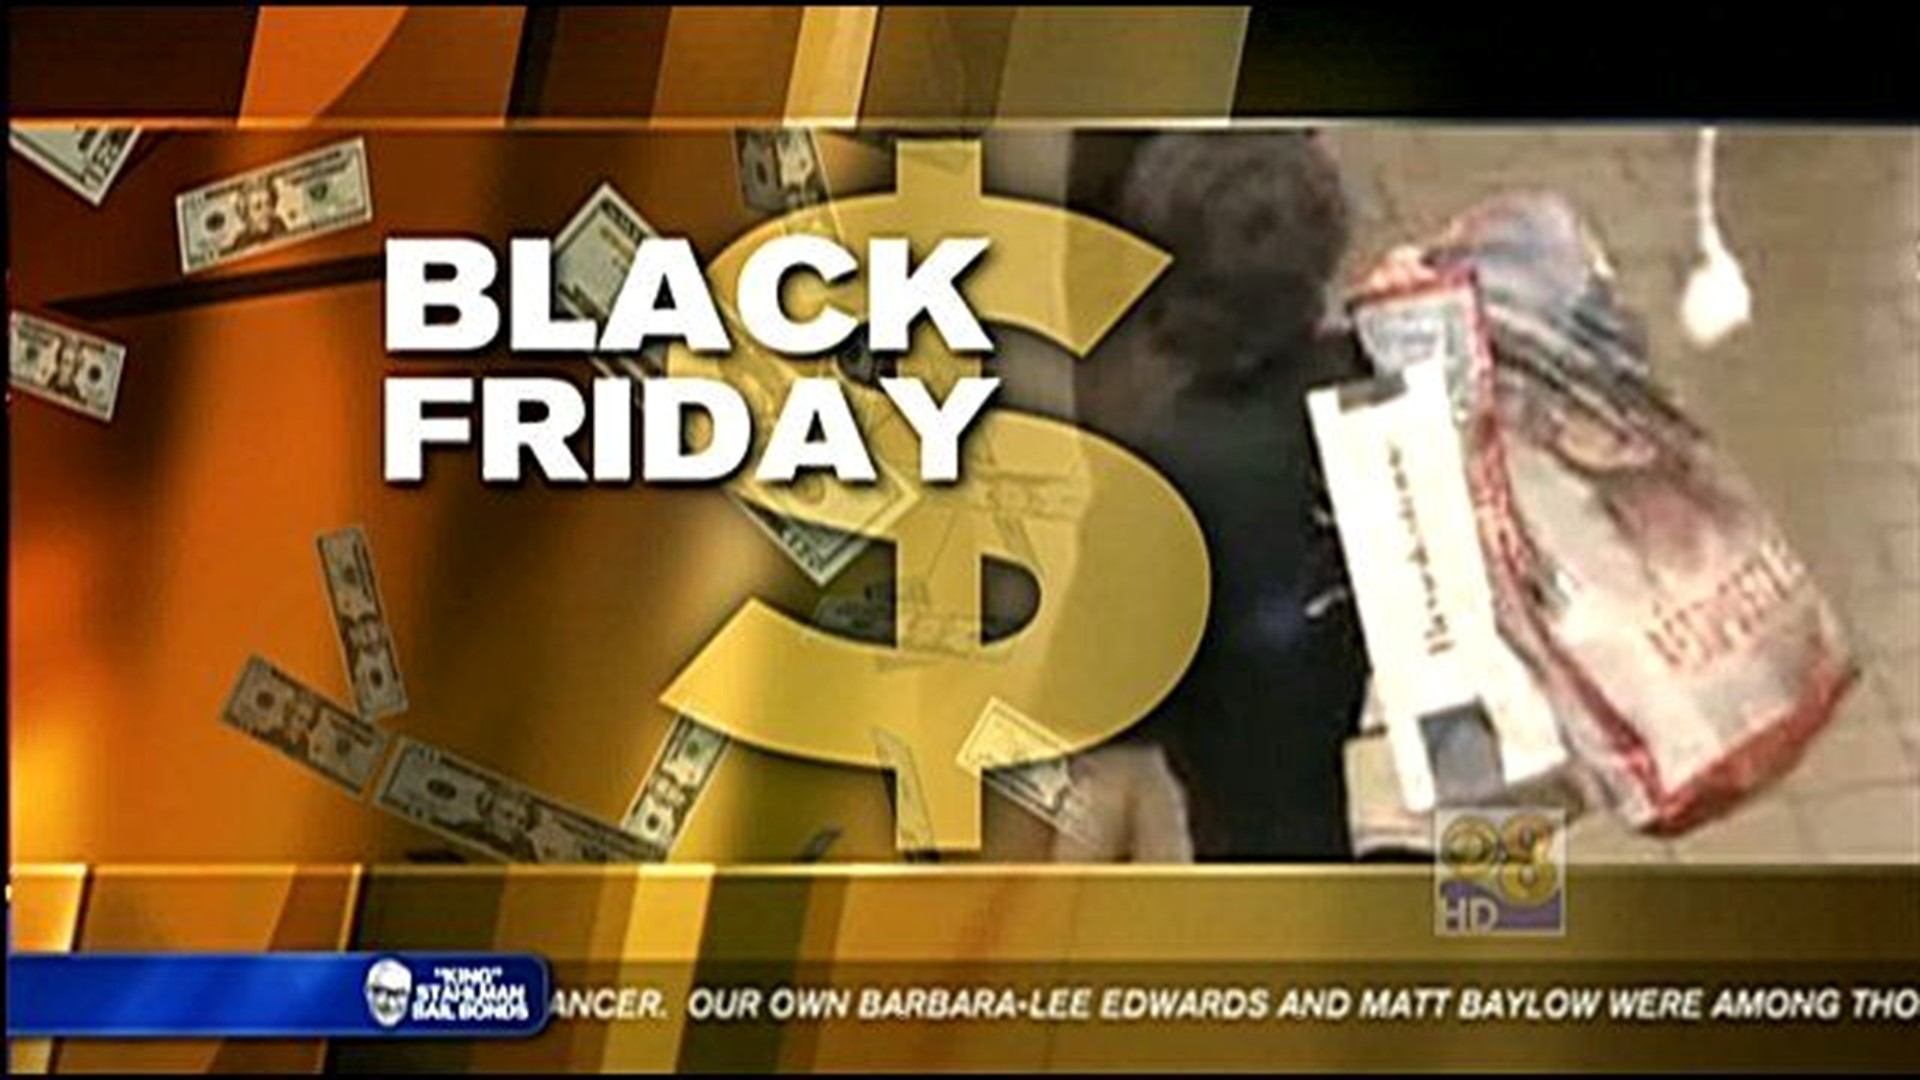 Black Friday sales starting way too early this year? | cbs8.com - Has Black Friday Deals Started